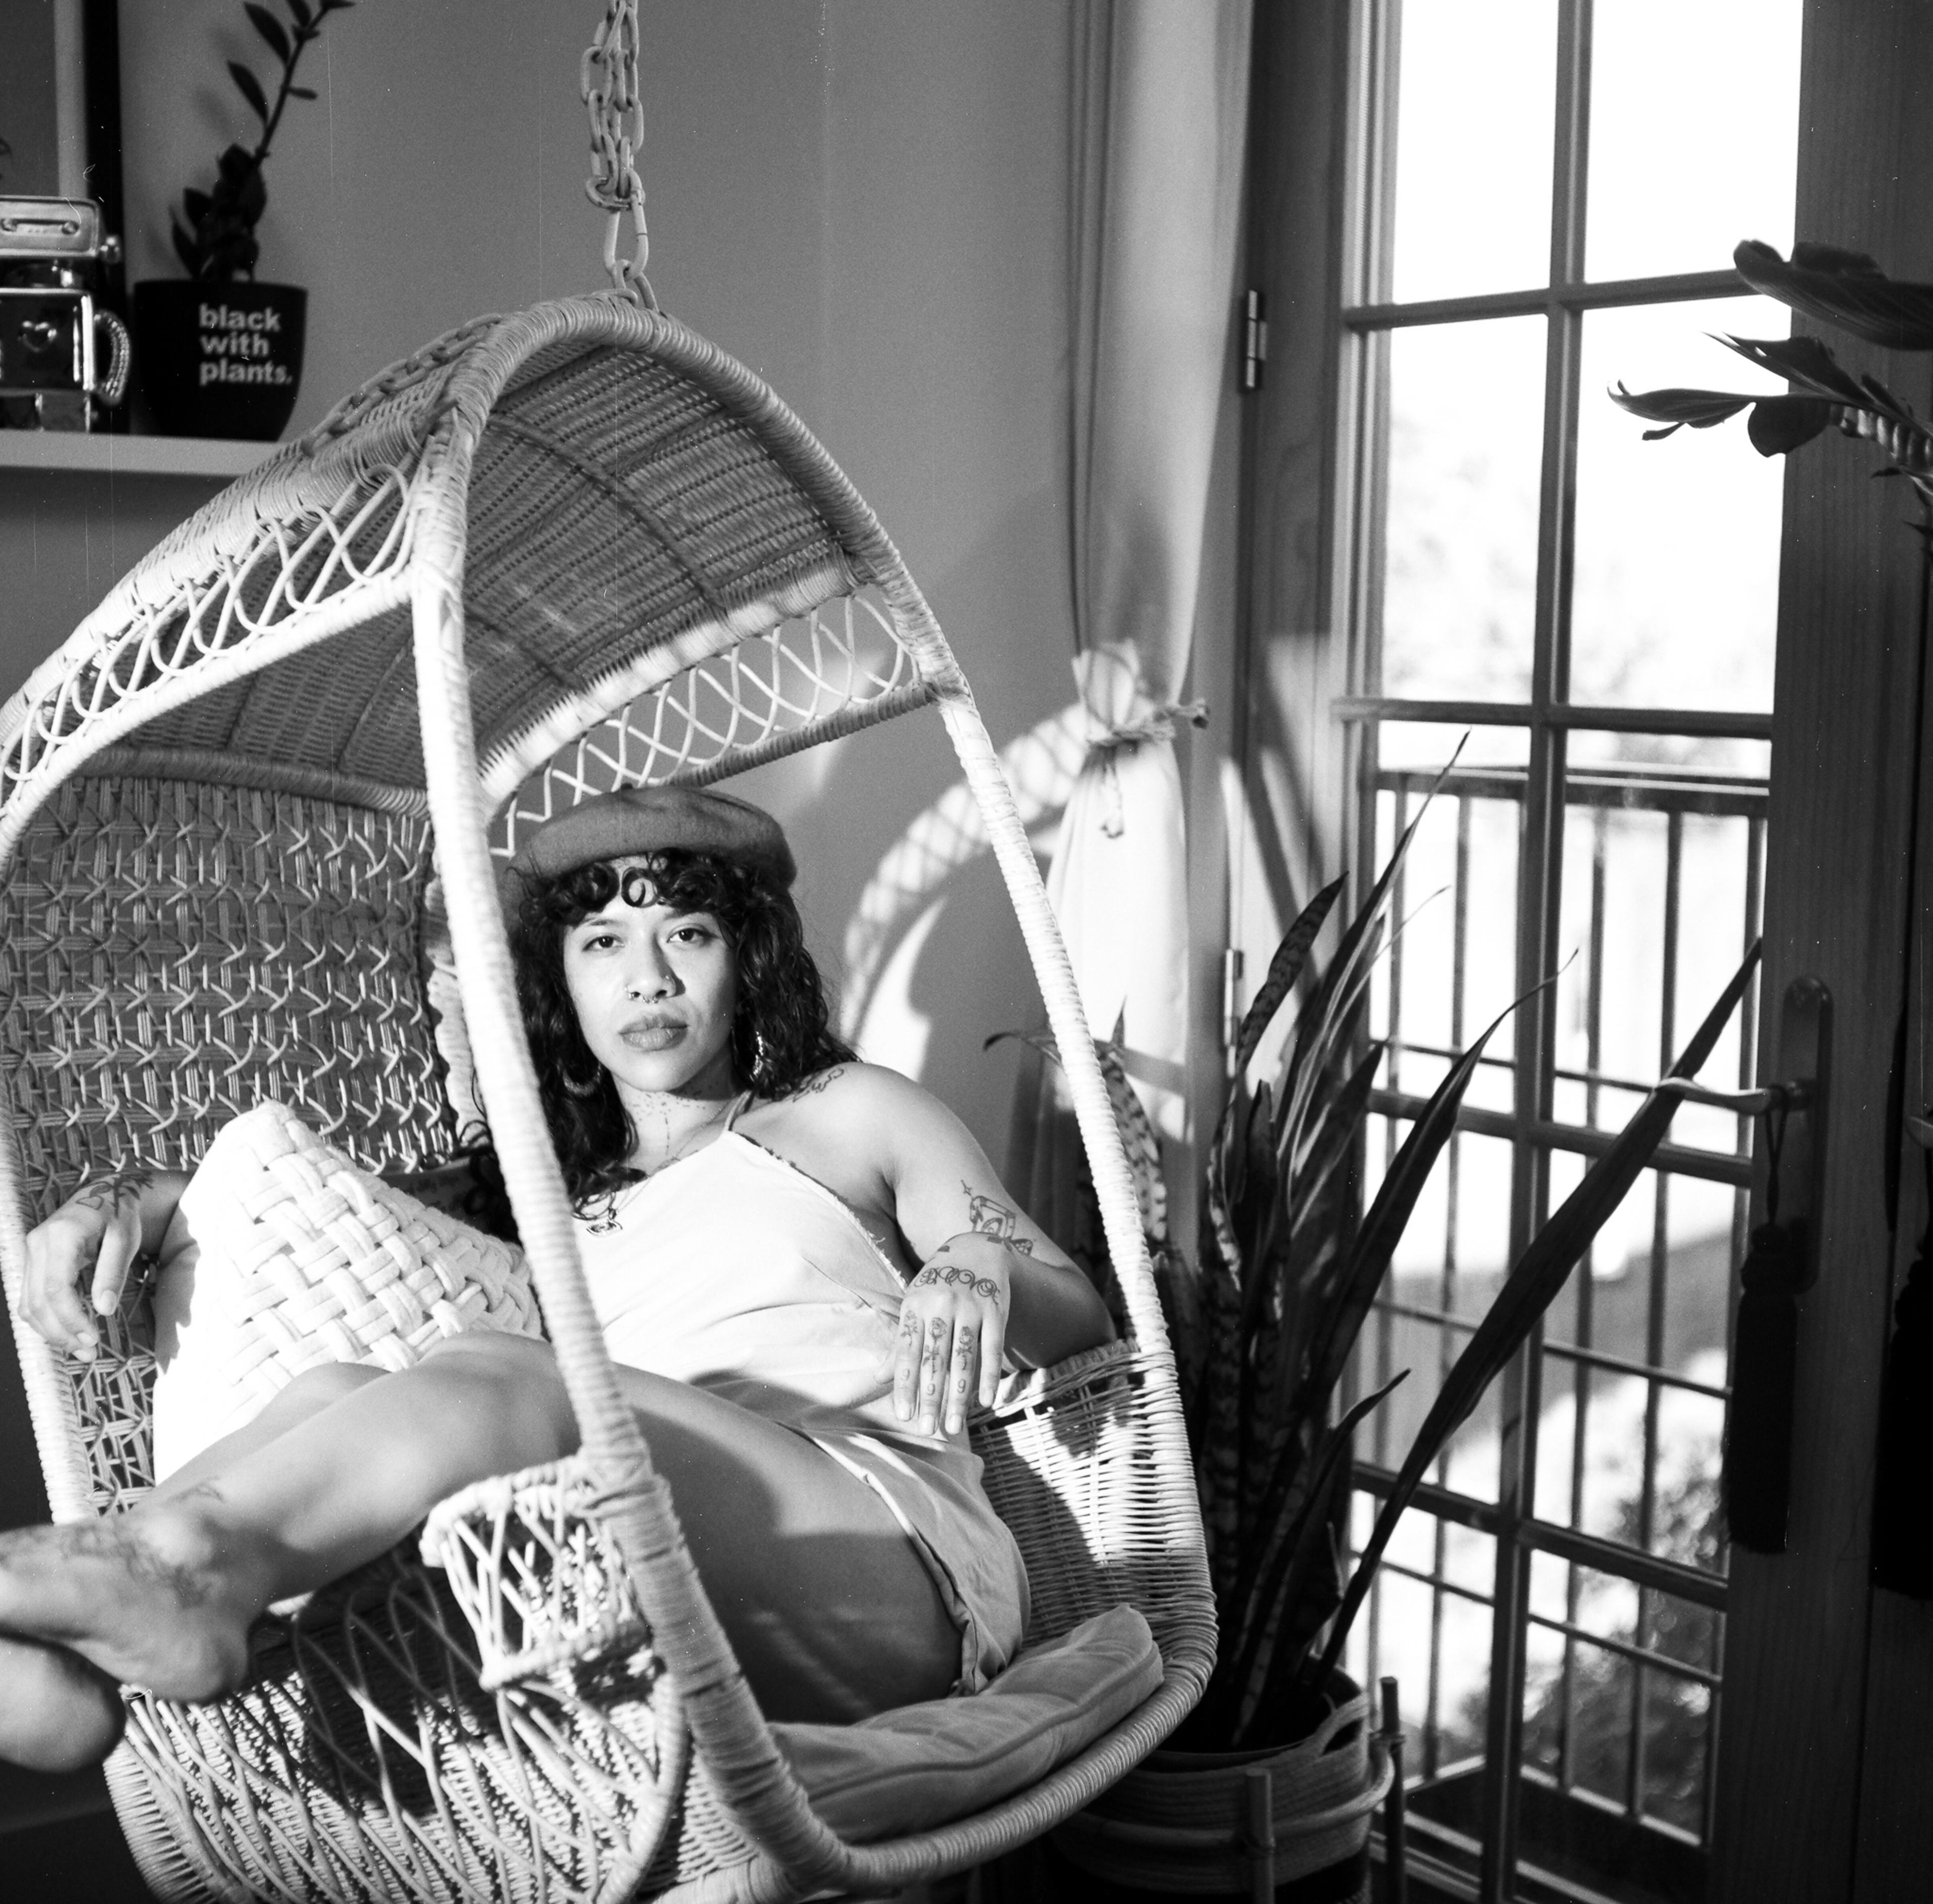 A woman lounging in a boho wicker swing chair surrounded by plants.